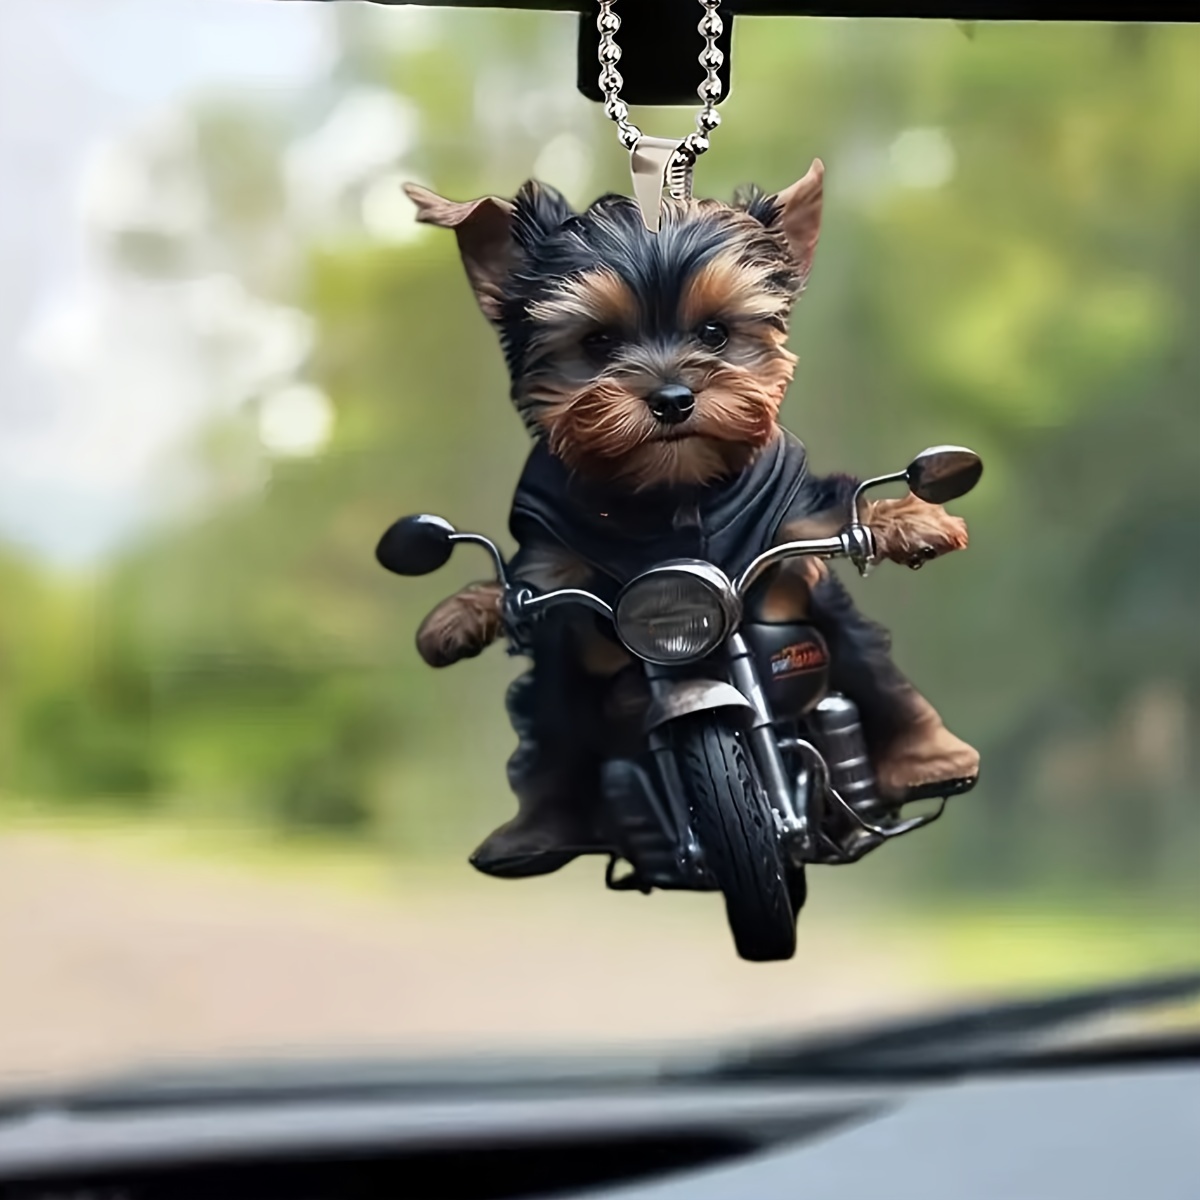 

Yorkshire Terrier On Motorcycle Acrylic Hanging Ornament - 2d Laser Cut Dog Design Car Rearview Mirror Charm, Home Decor, Backpack Accessory, Christmas Tree Pendant